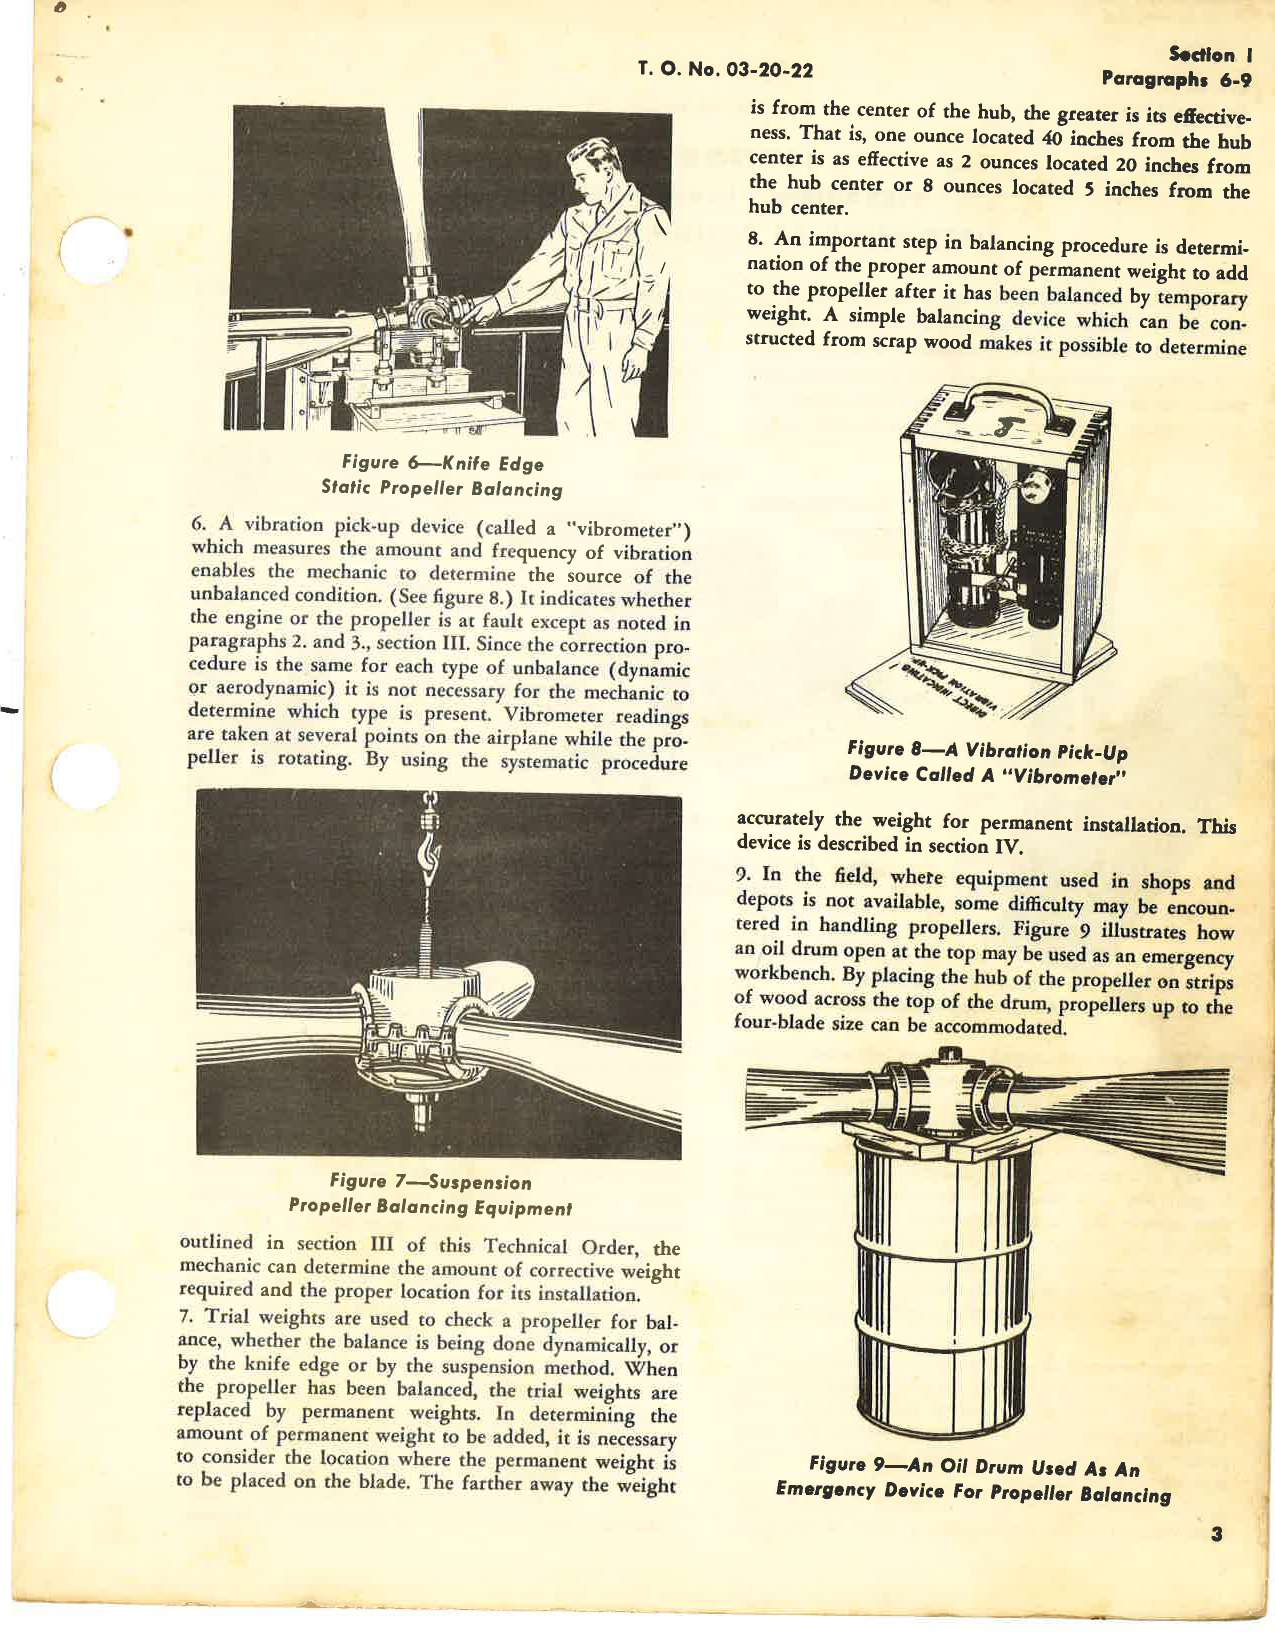 Sample page 5 from AirCorps Library document: Dynamic Balancing of Propellers